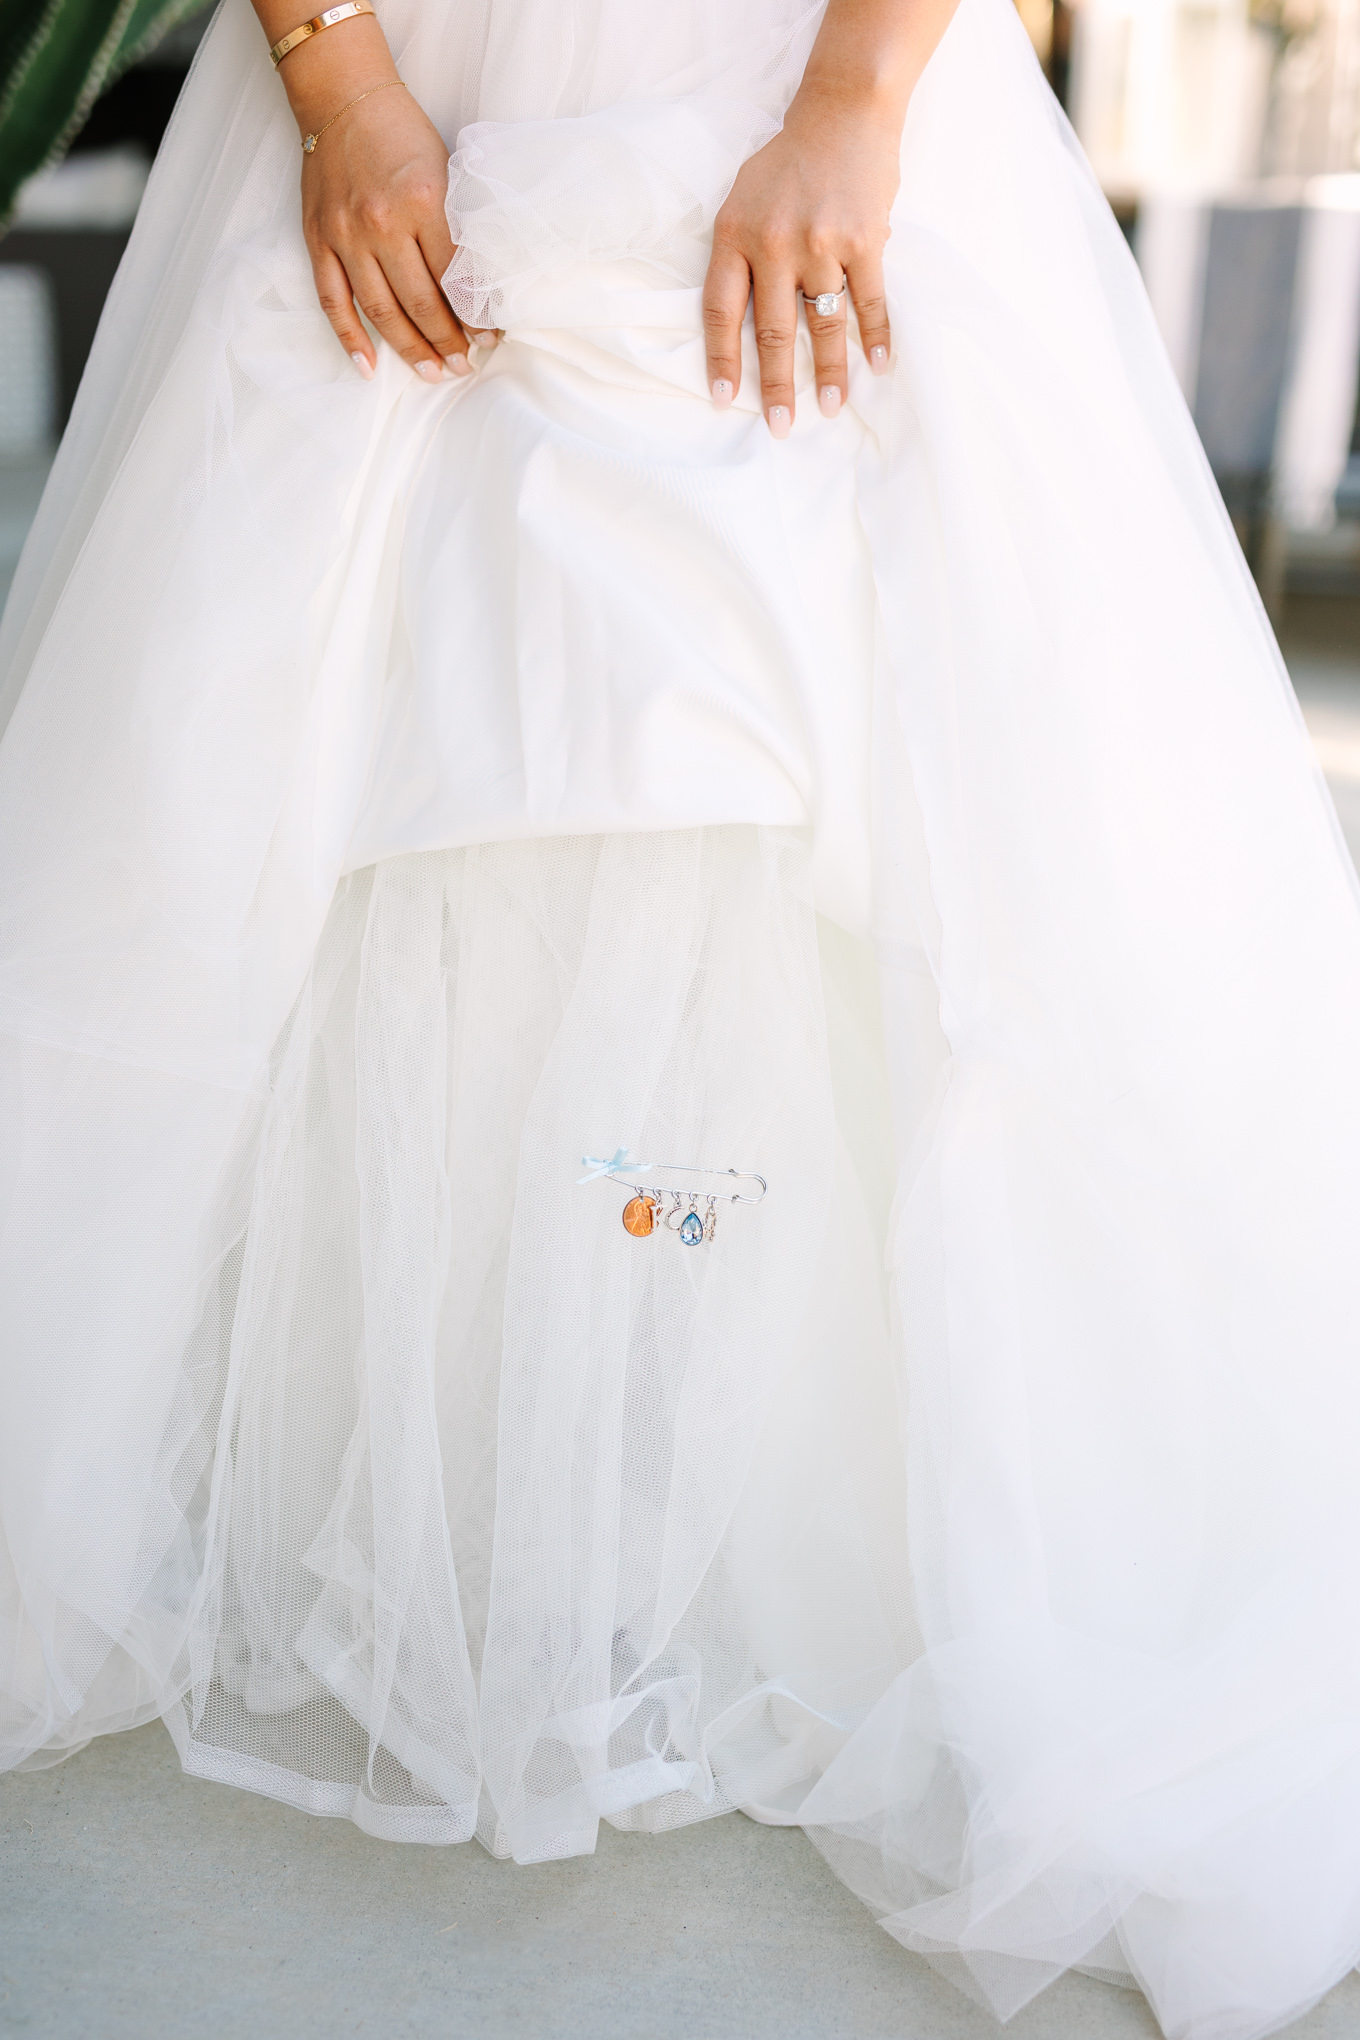 Special pin on bridal gown | Pink and orange Lautner Compound wedding | Colorful Palm Springs wedding photography | #palmspringsphotographer #palmspringswedding #lautnercompound #southerncaliforniawedding  Source: Mary Costa Photography | Los Angeles